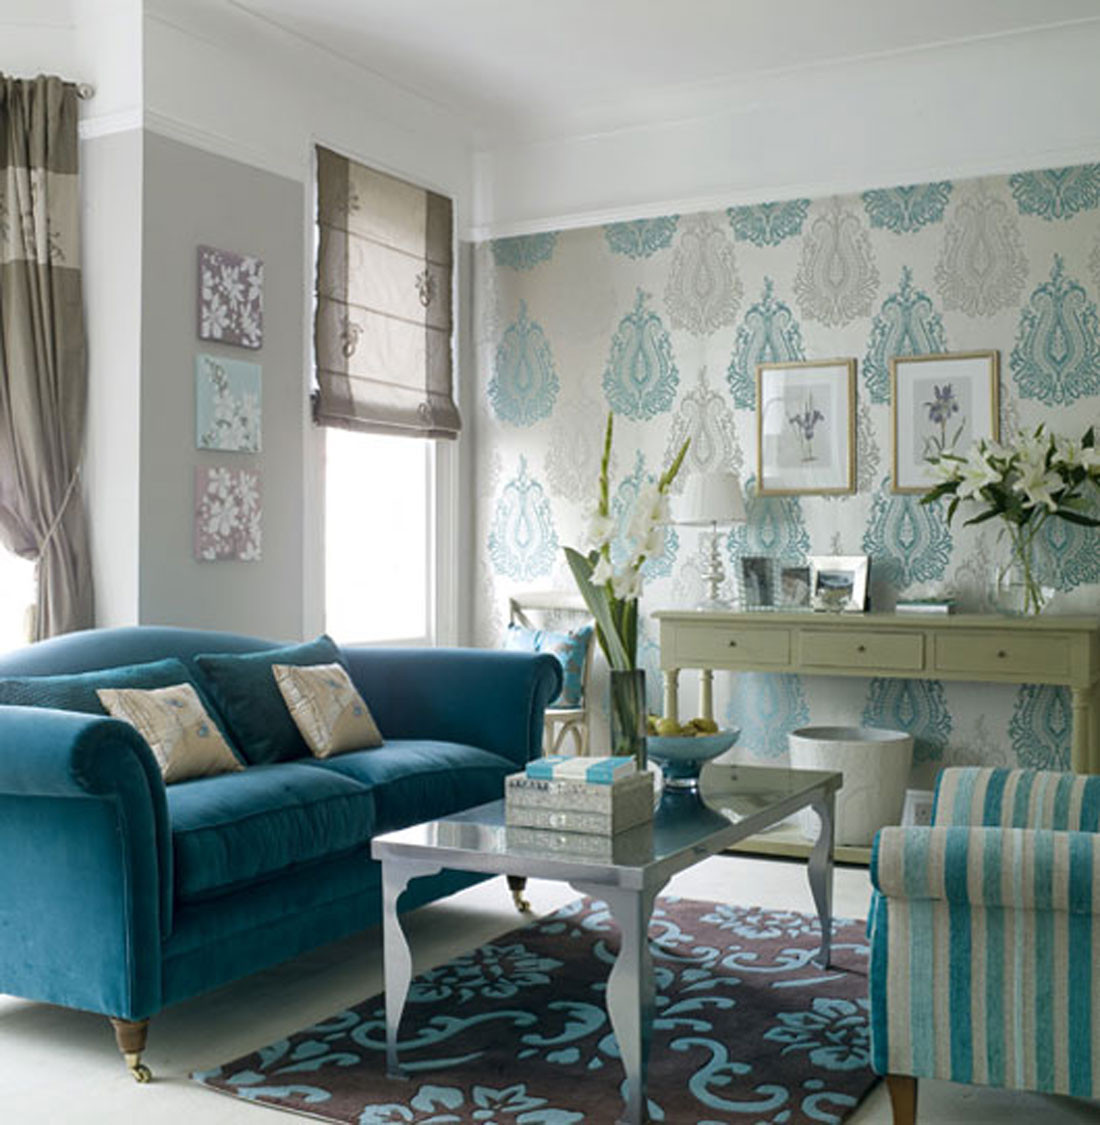 Aqua Curtains Living Room
 The Texture of Teal and Turquoise – A Bold and Beautiful